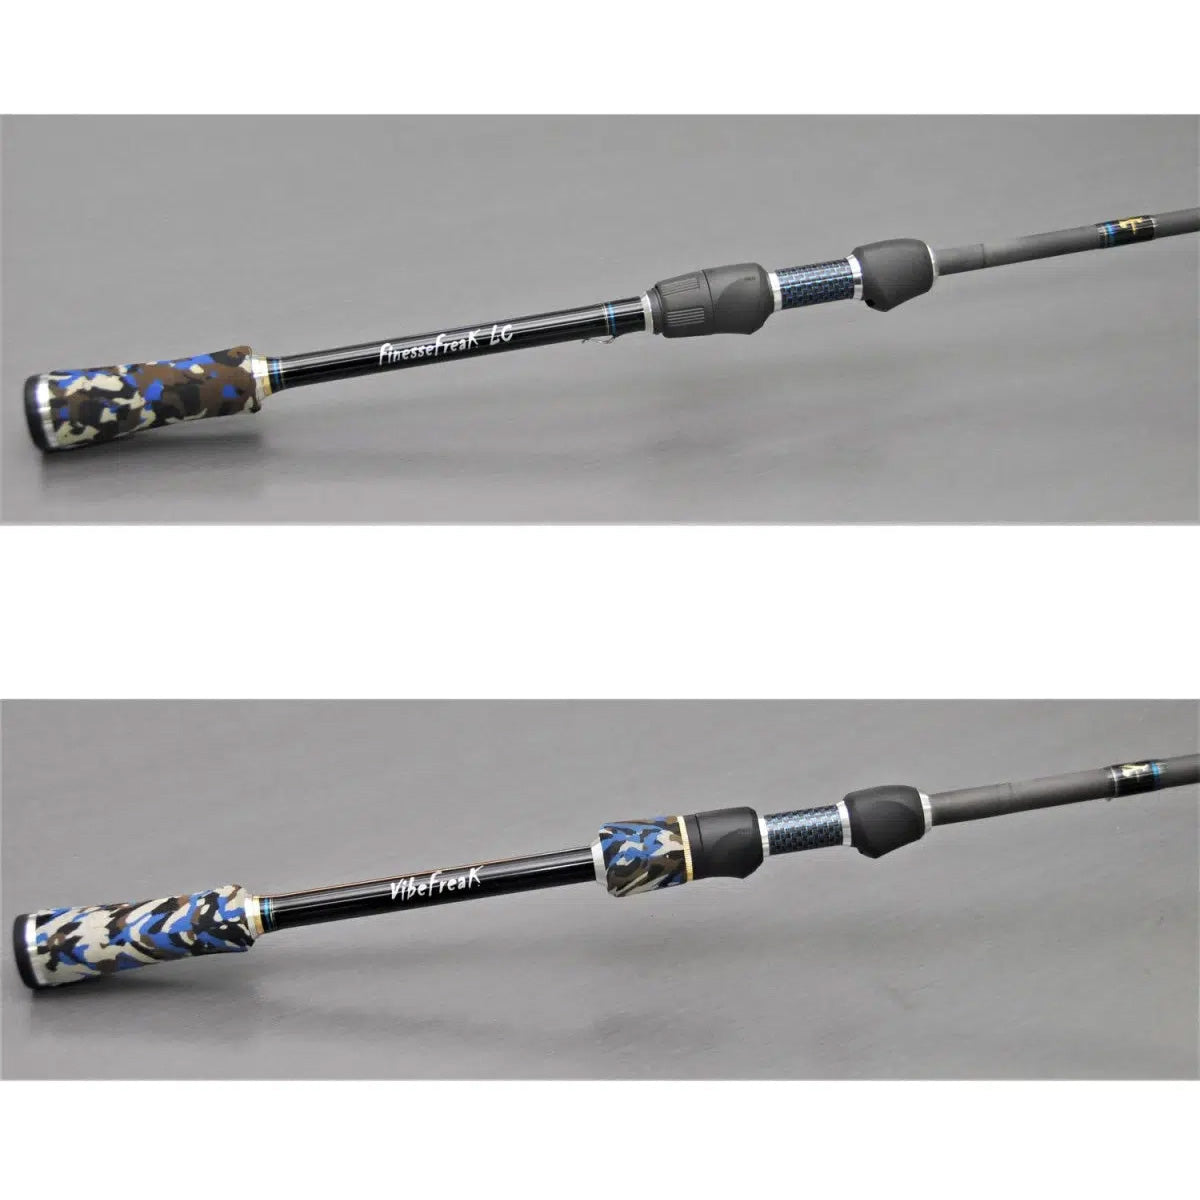 Squad Spin Spinning Rod - Freshwater Rod, Spinning Rods